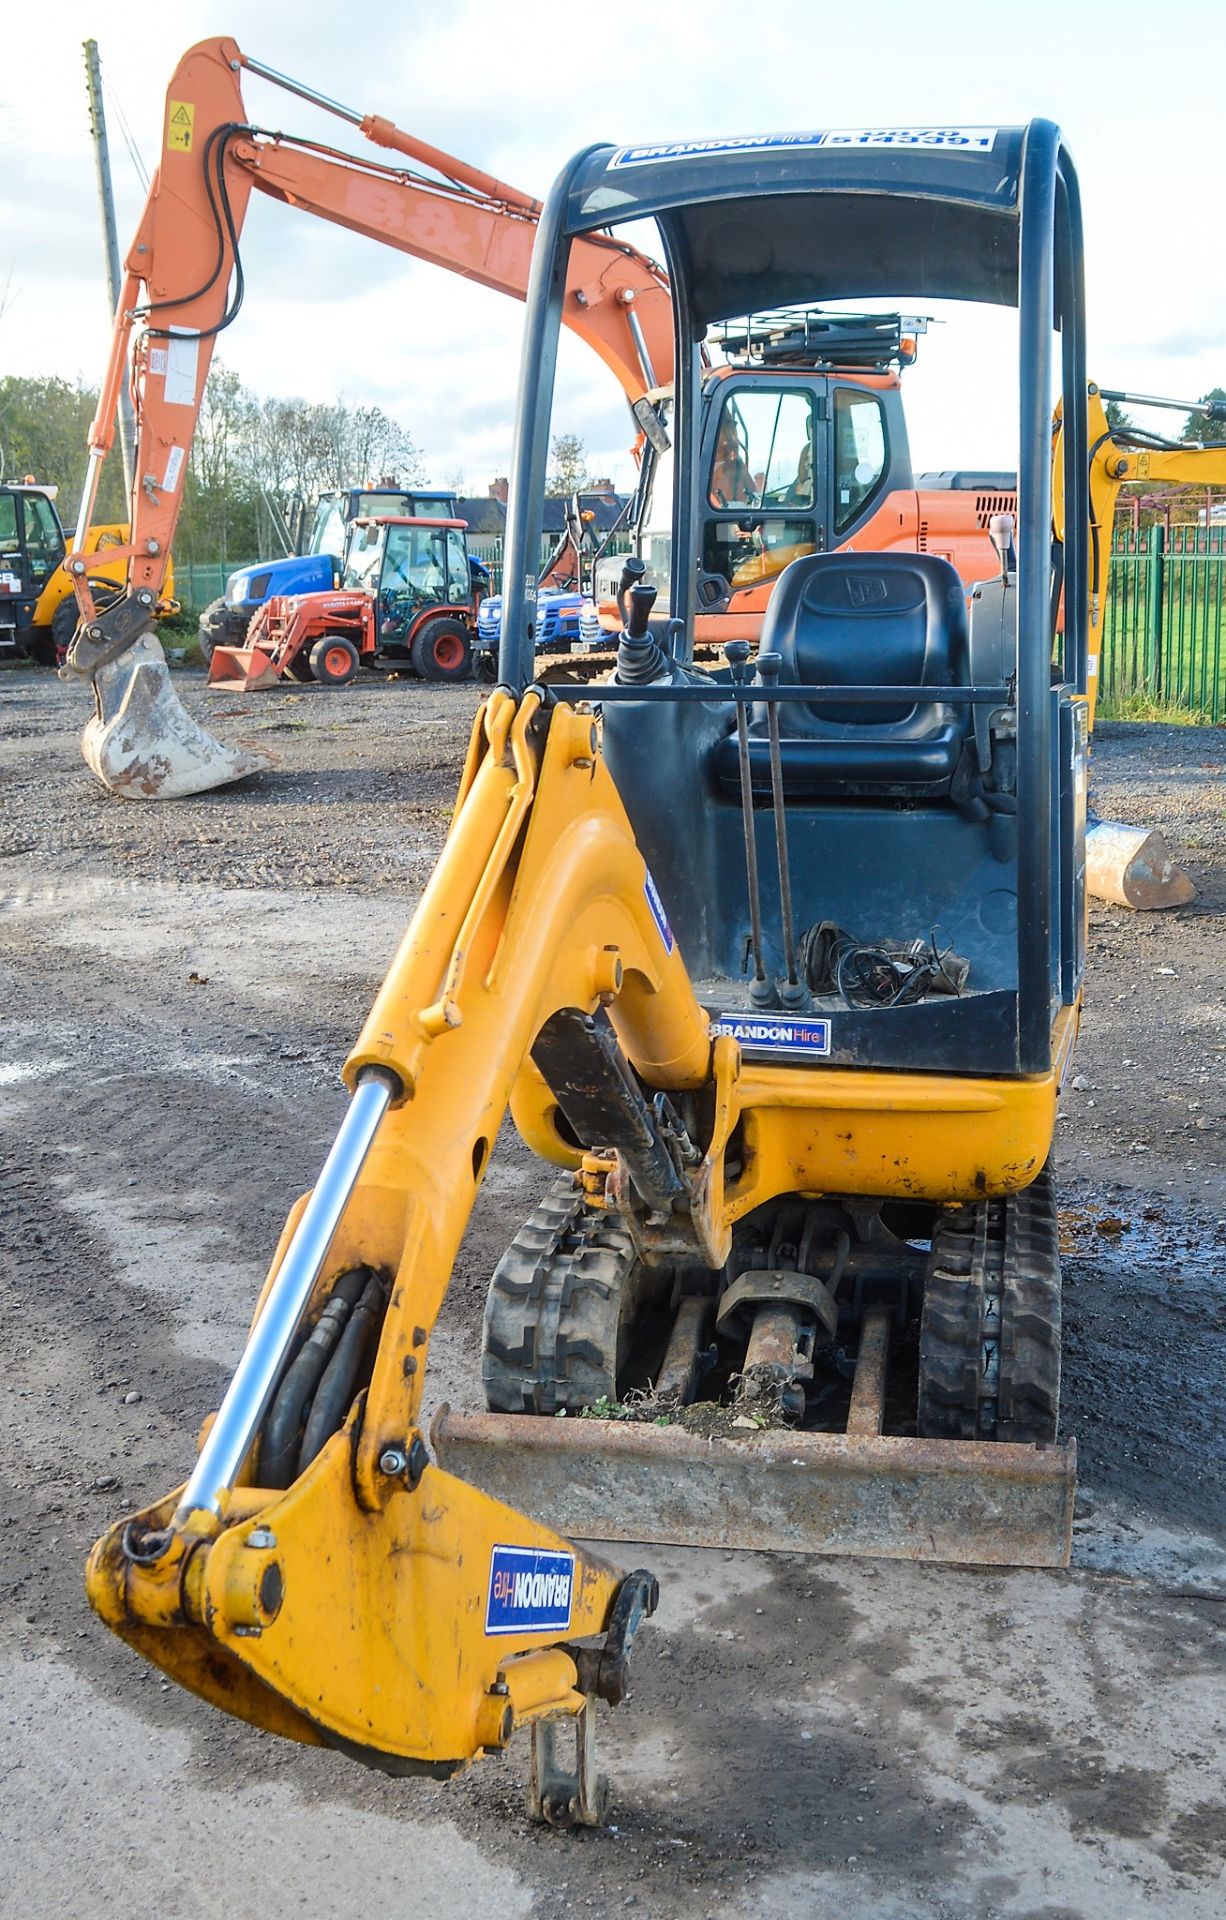 JCB 801.5 1.5 tonne rubber tracked mini excavator Year: S/N: Recorded Hours: Not displayed (Clock - Image 5 of 11